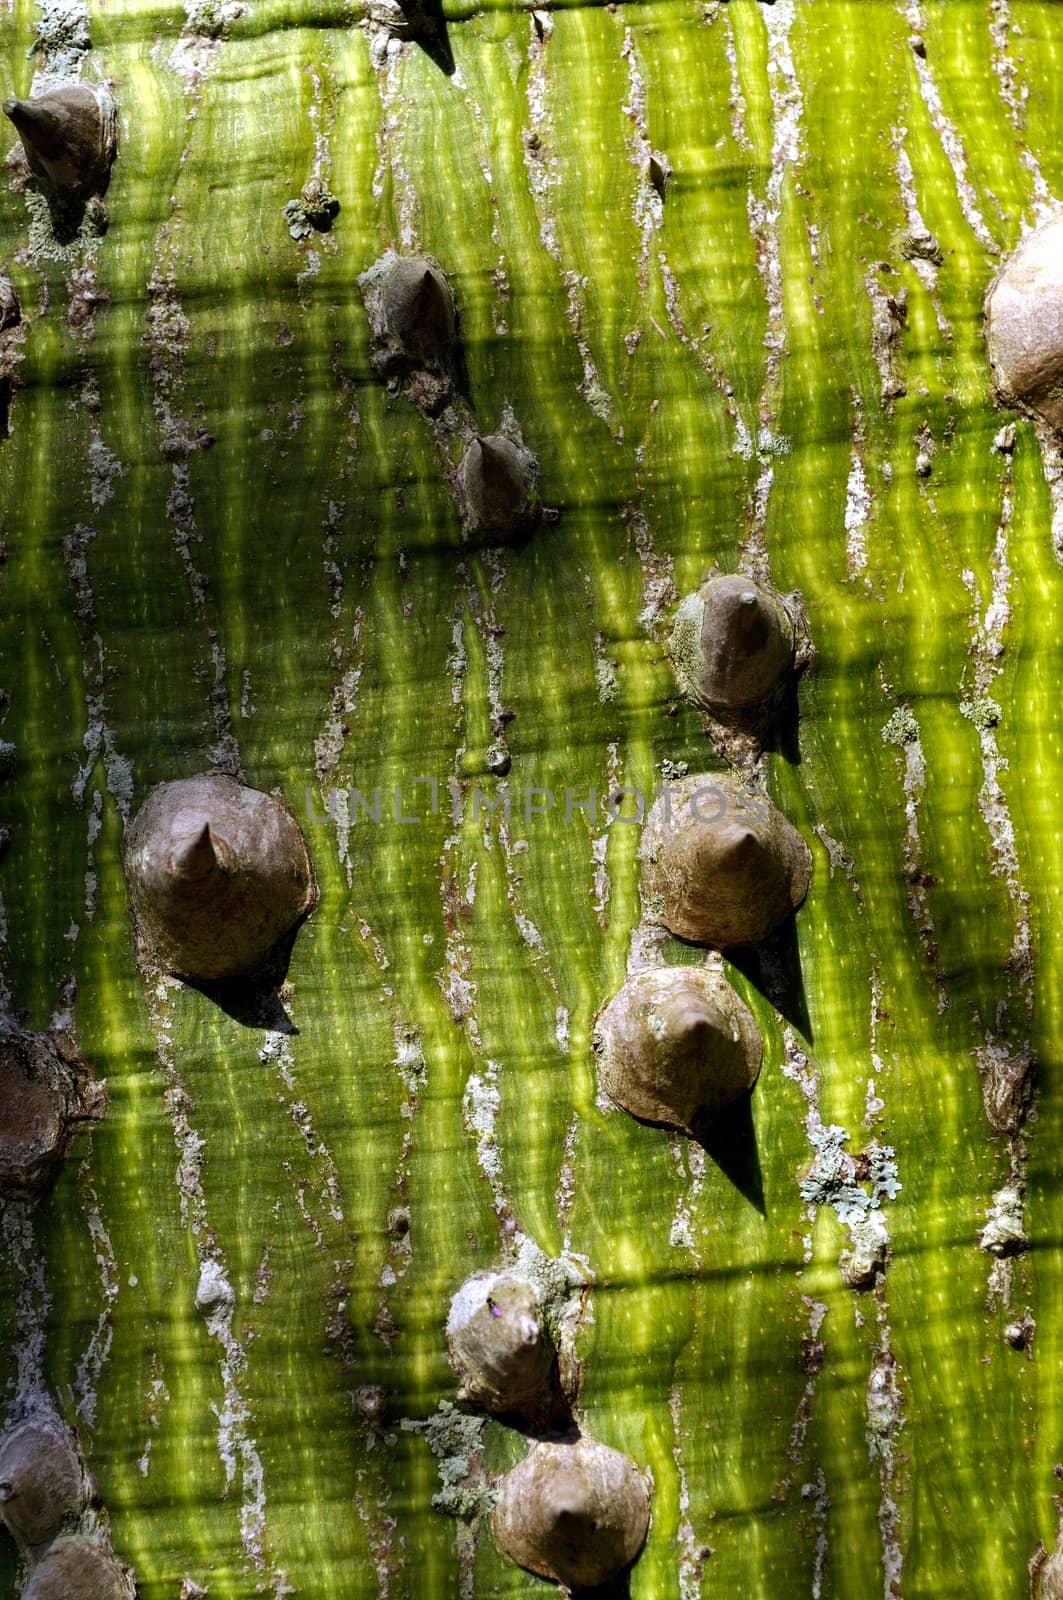 Sharp thorns on the trunk of a Silk Floss tree